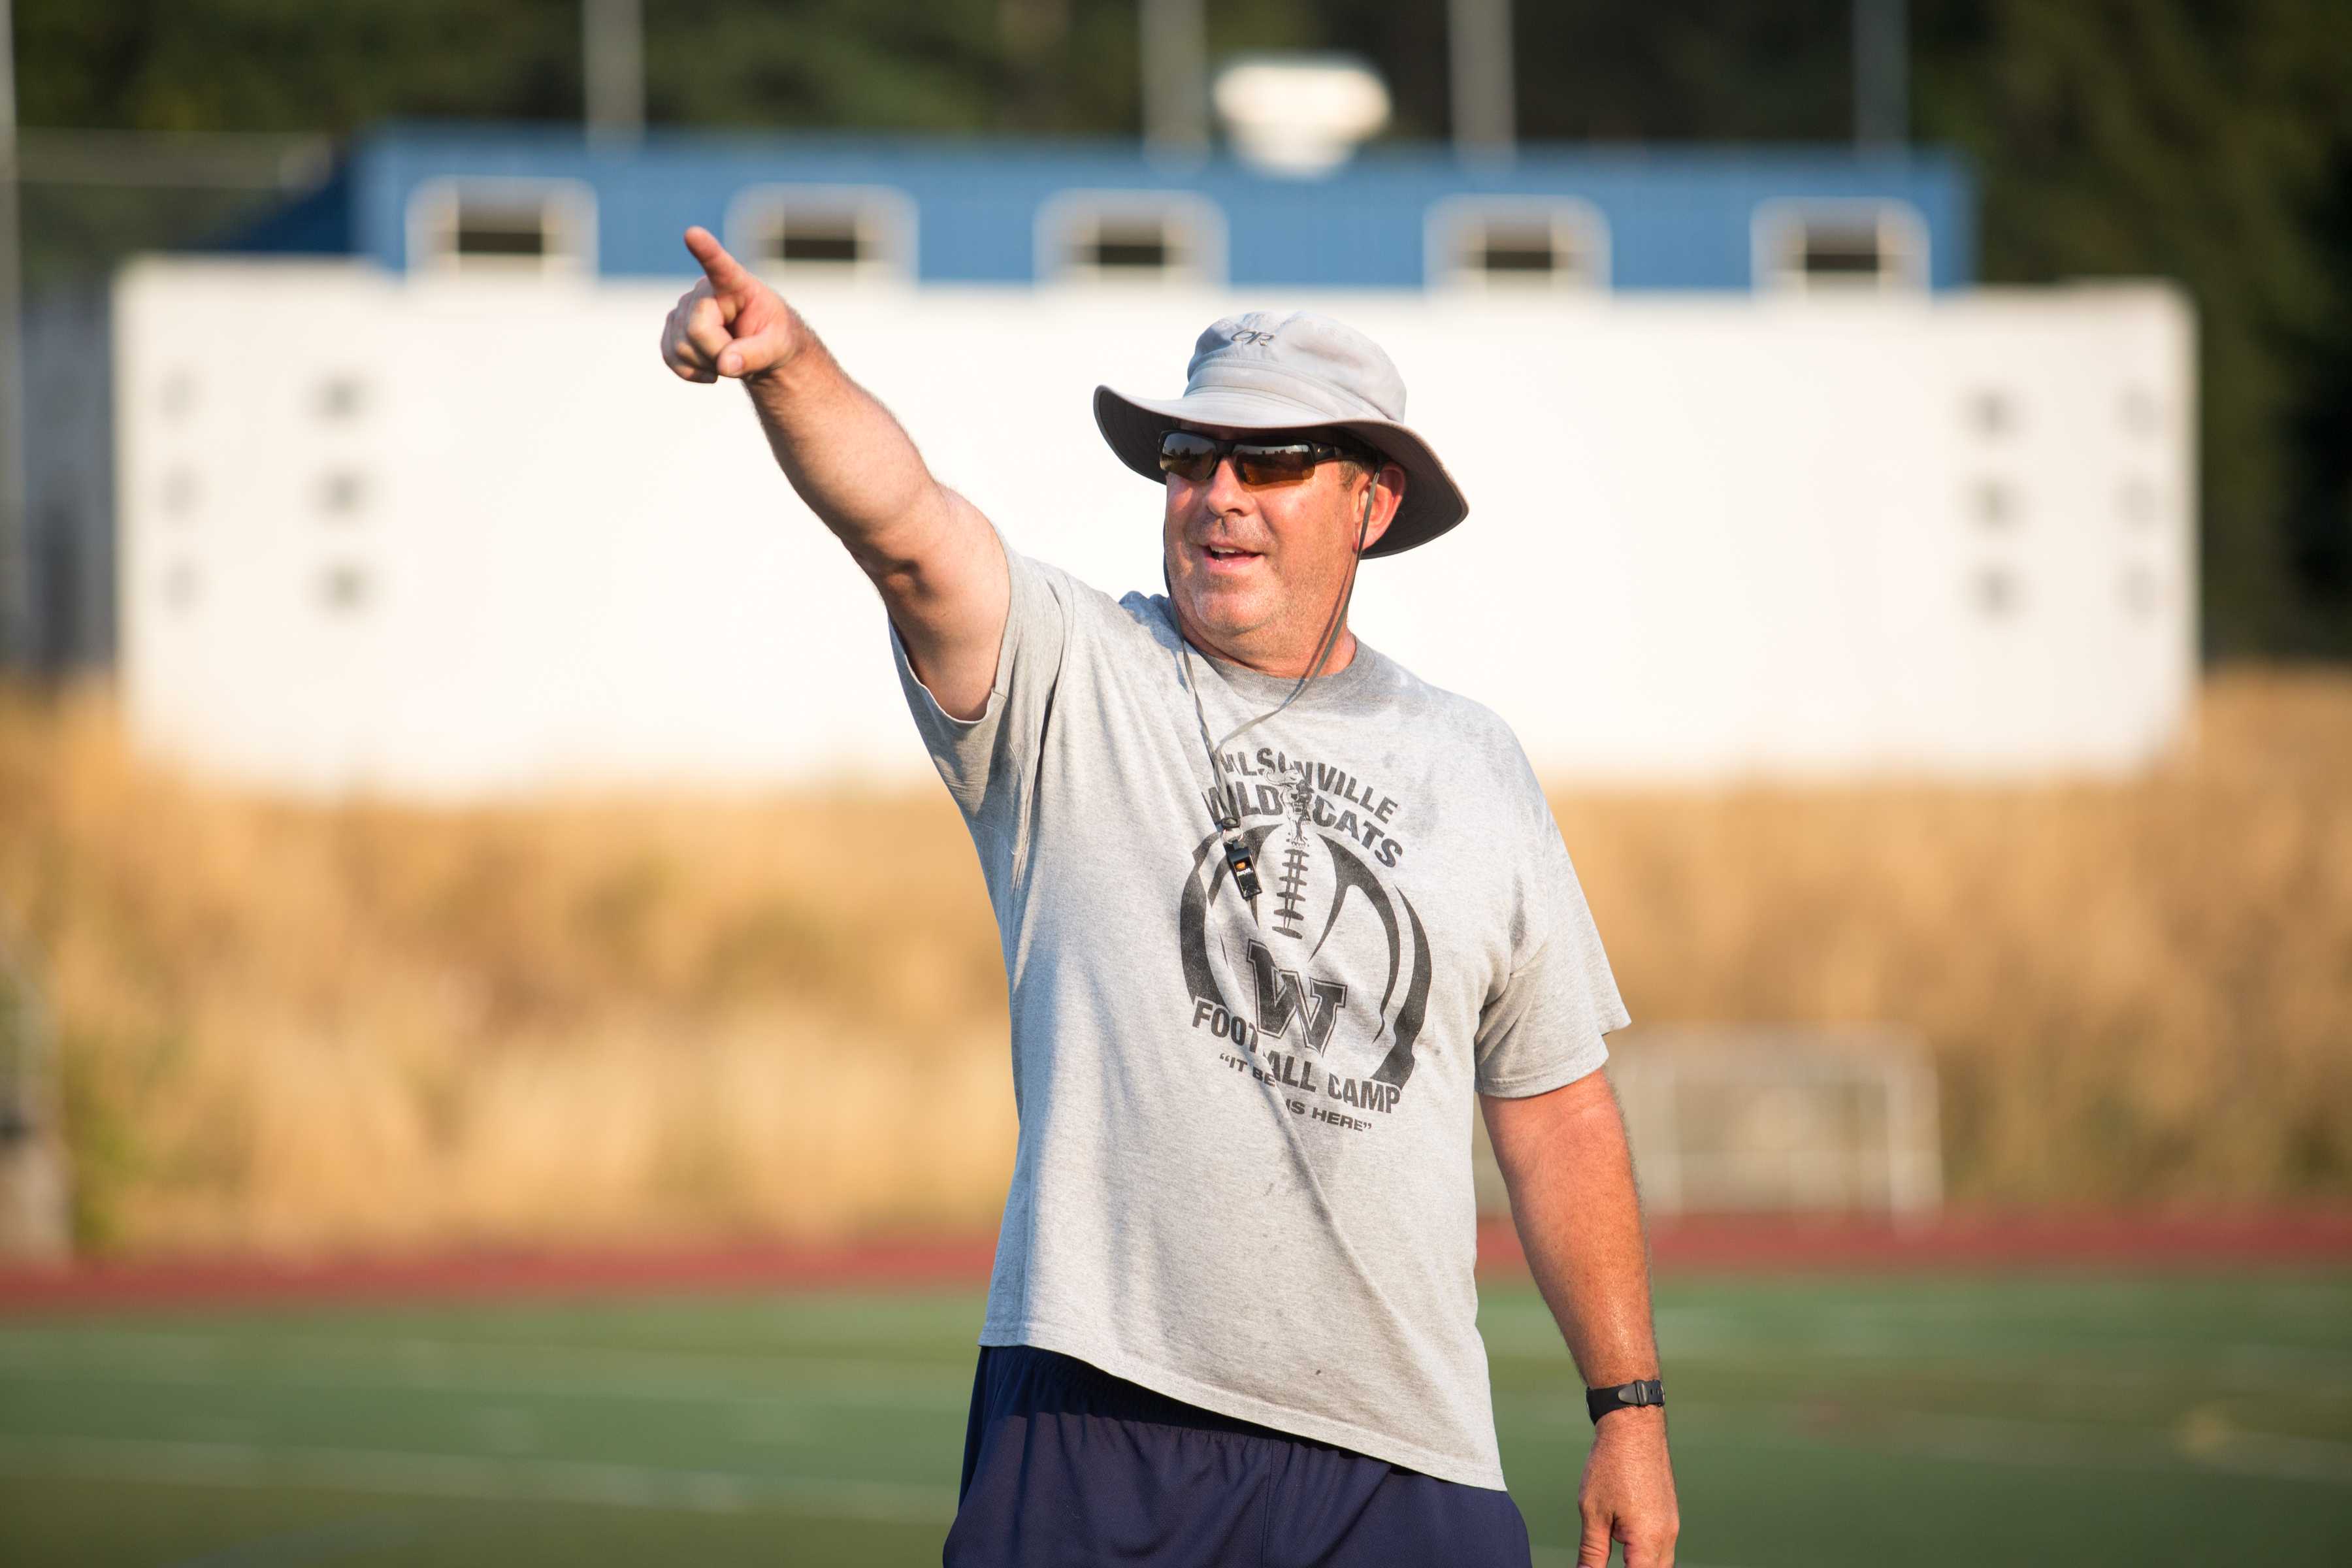 Coach Adam Guenther guided Wilsonville to the Class 5A semifinals last season. (Chris Dorwart/for OregonLive)